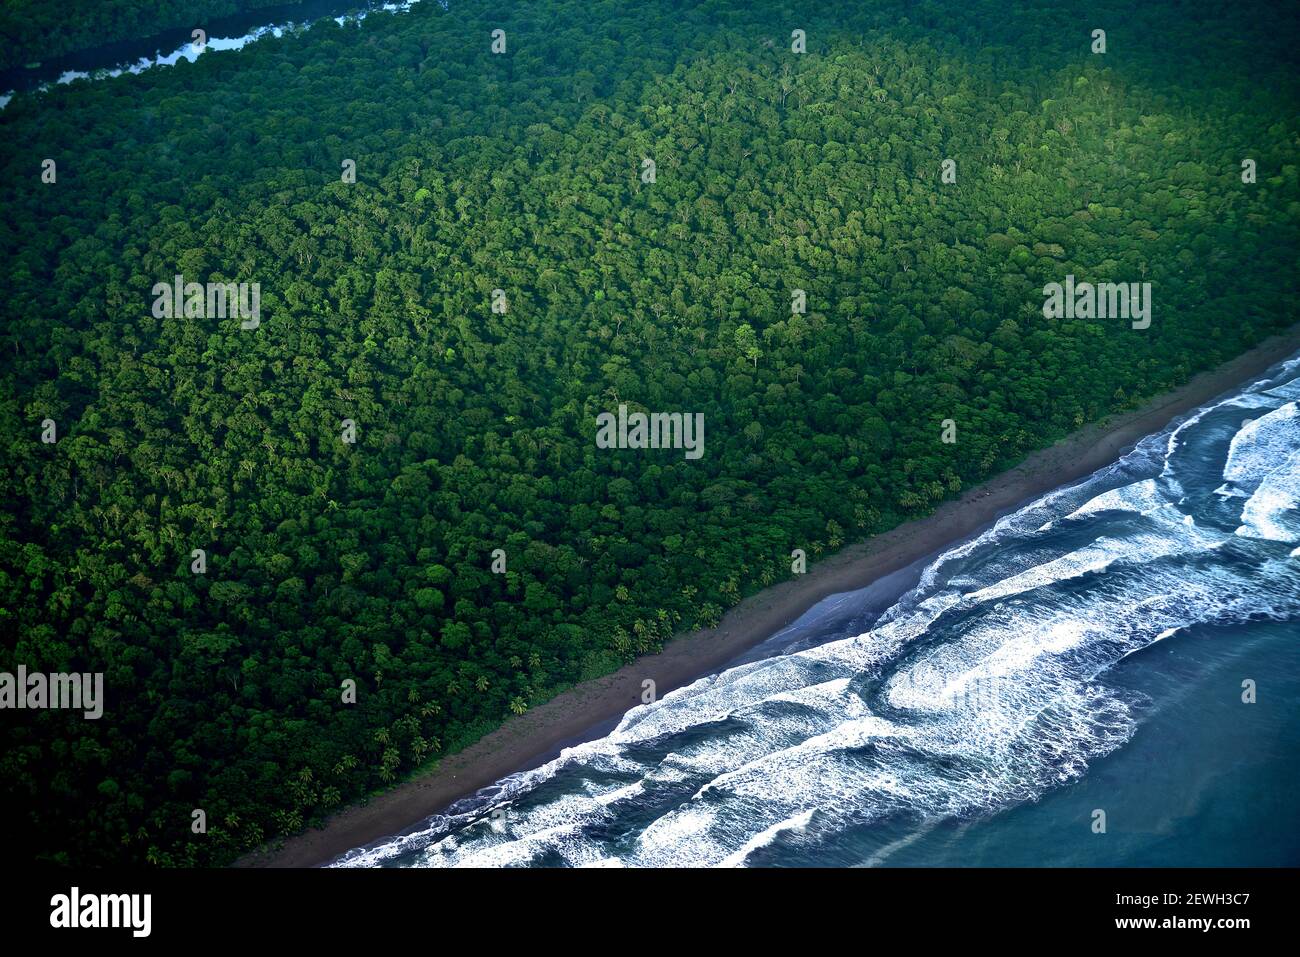 Aerial view of Rainforest and Sea. Tortuguero National Park, Costa Rica Stock Photo